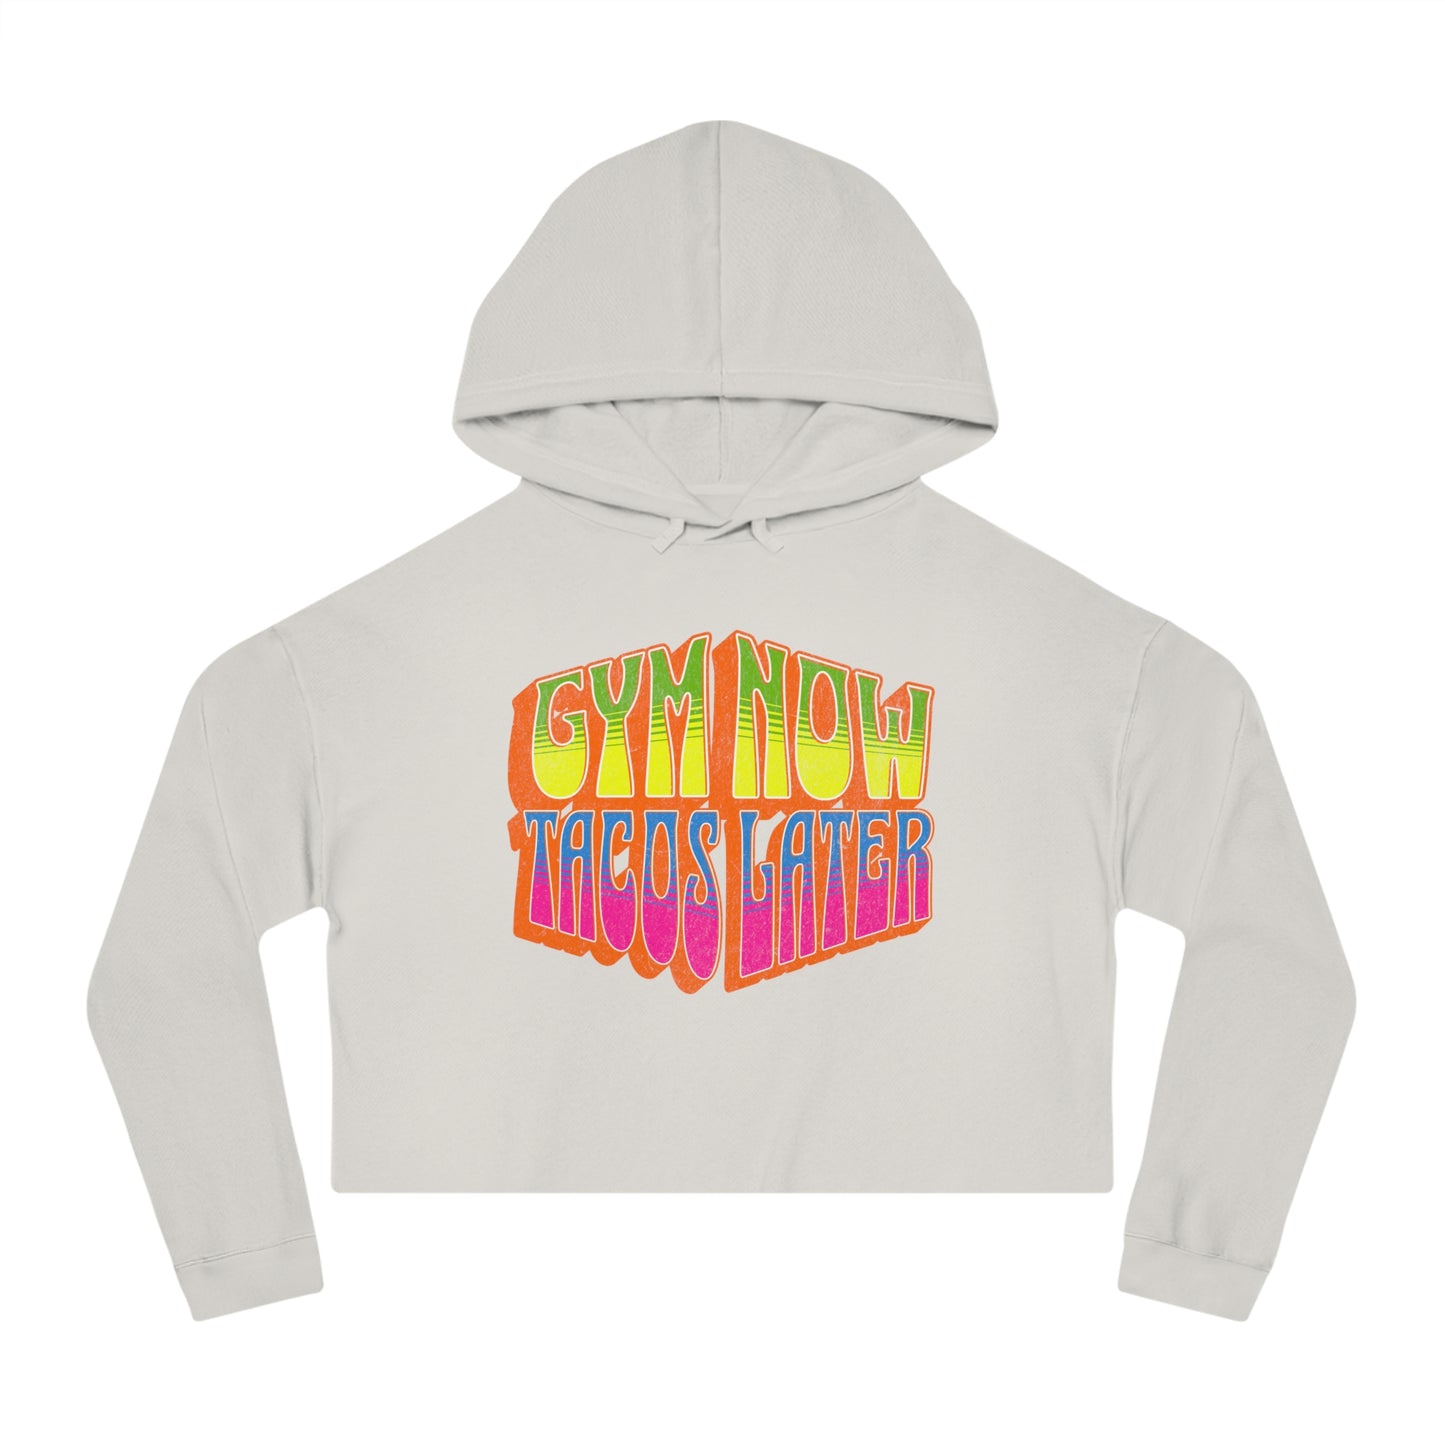 "Gym Now, Tacos Later" Women’s Cropped Hooded Sweatshirt